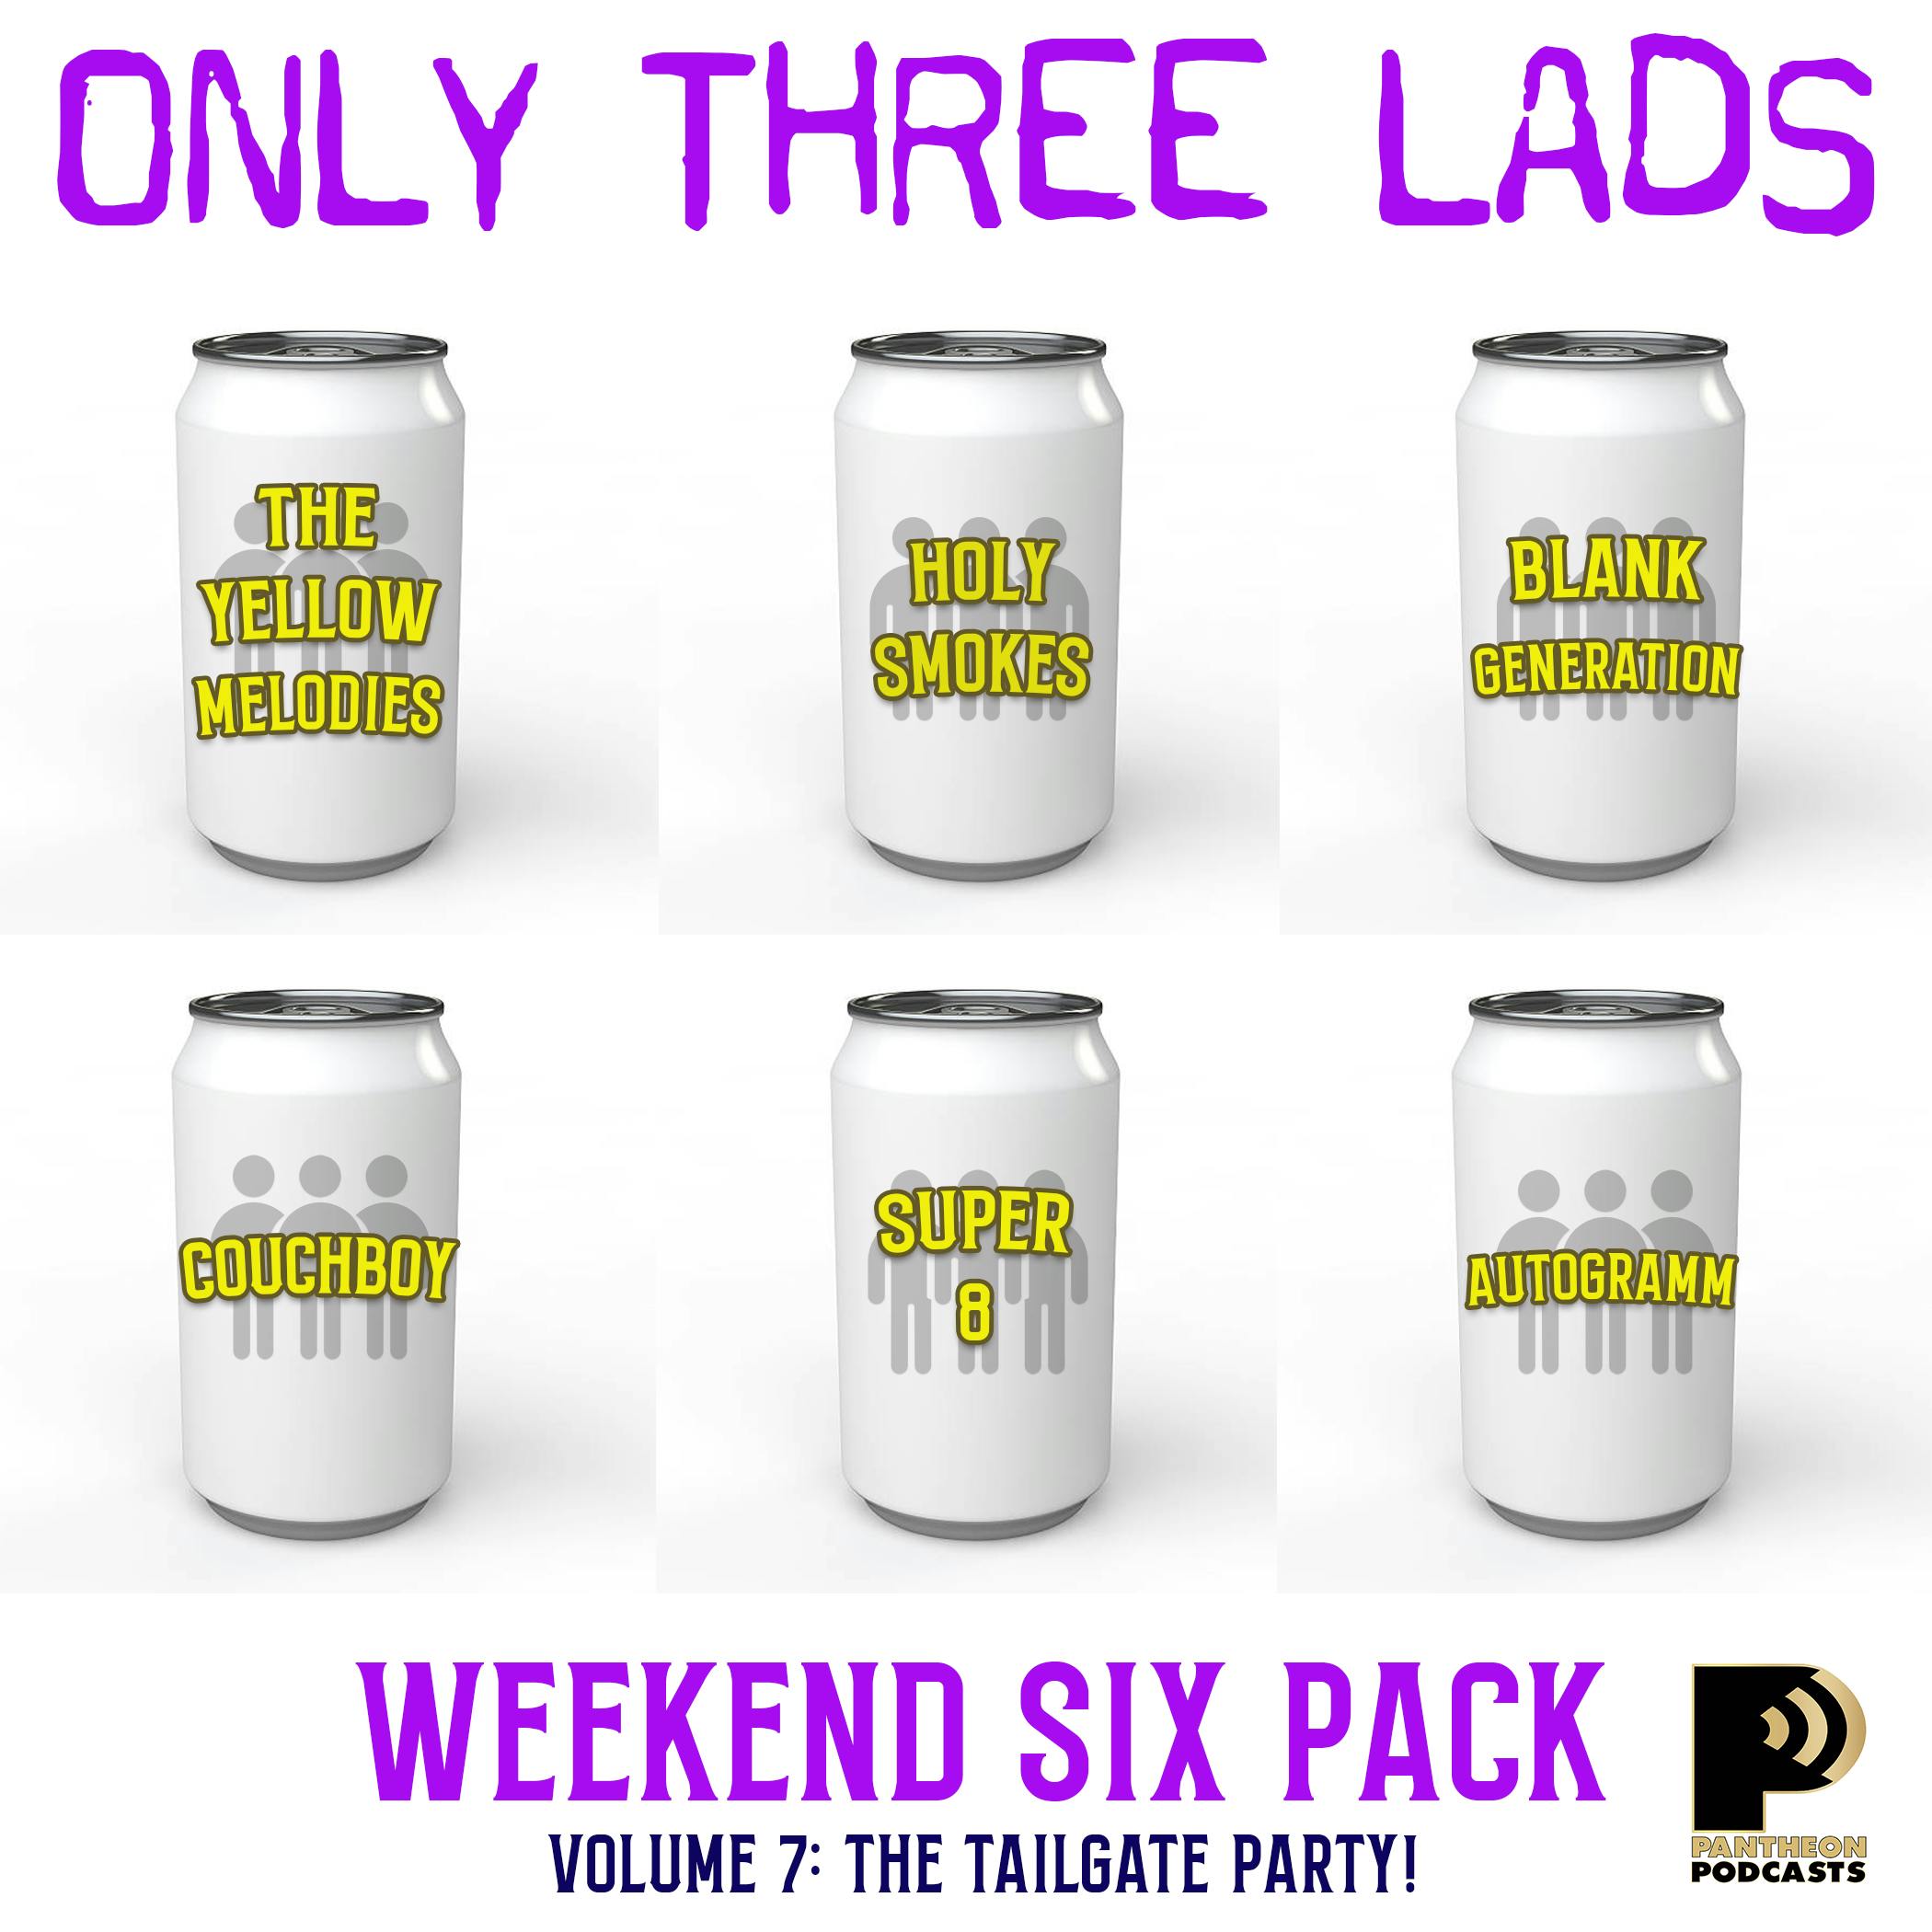 O3L Presents: Weekend Six Pack, Vol. 7 - The Tailgate Party!